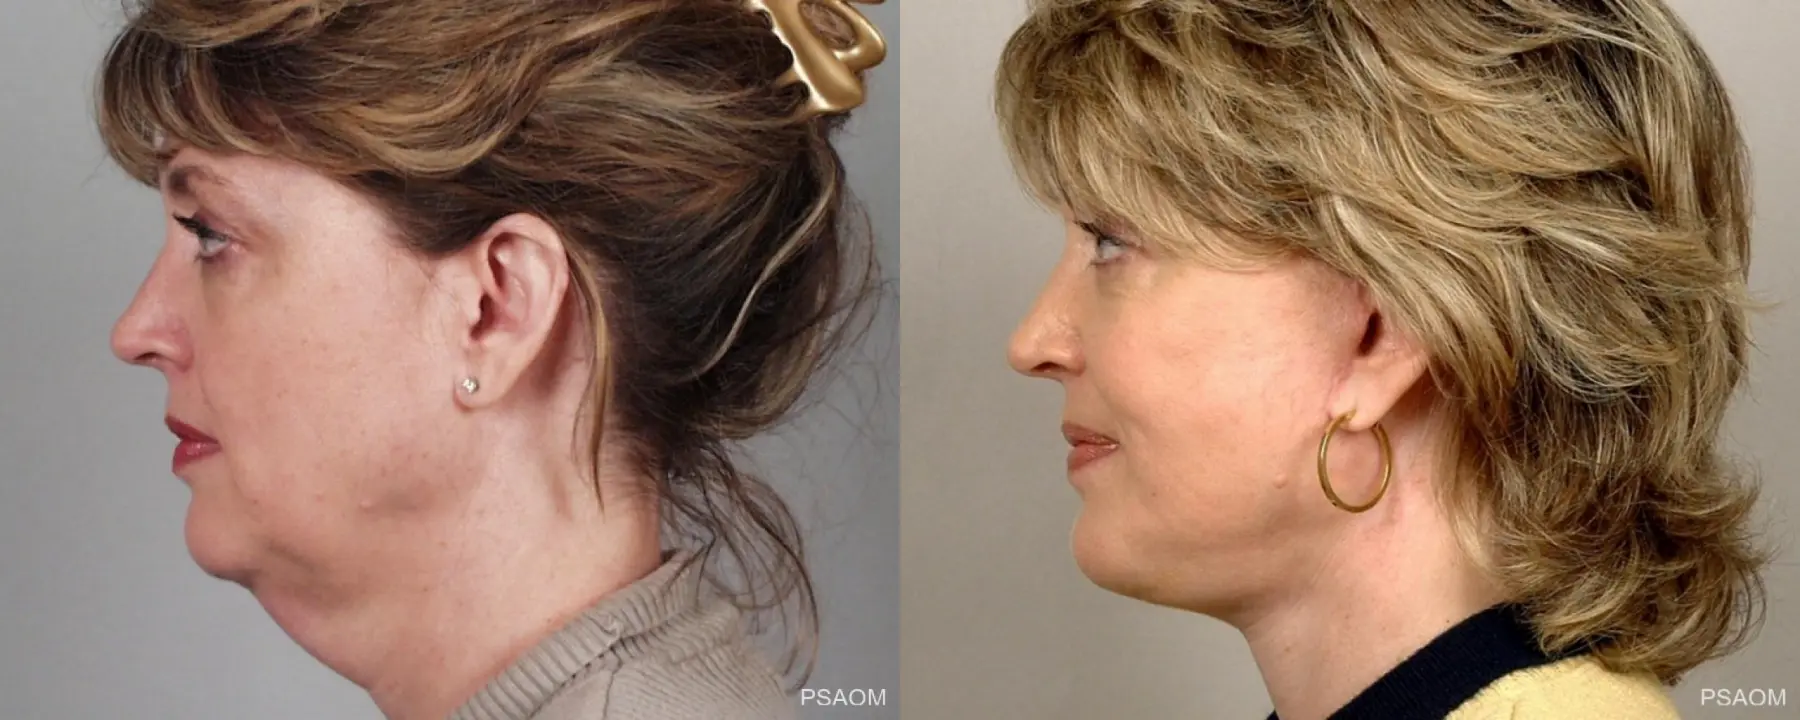 Facelift: Patient 1 - Before and After 2